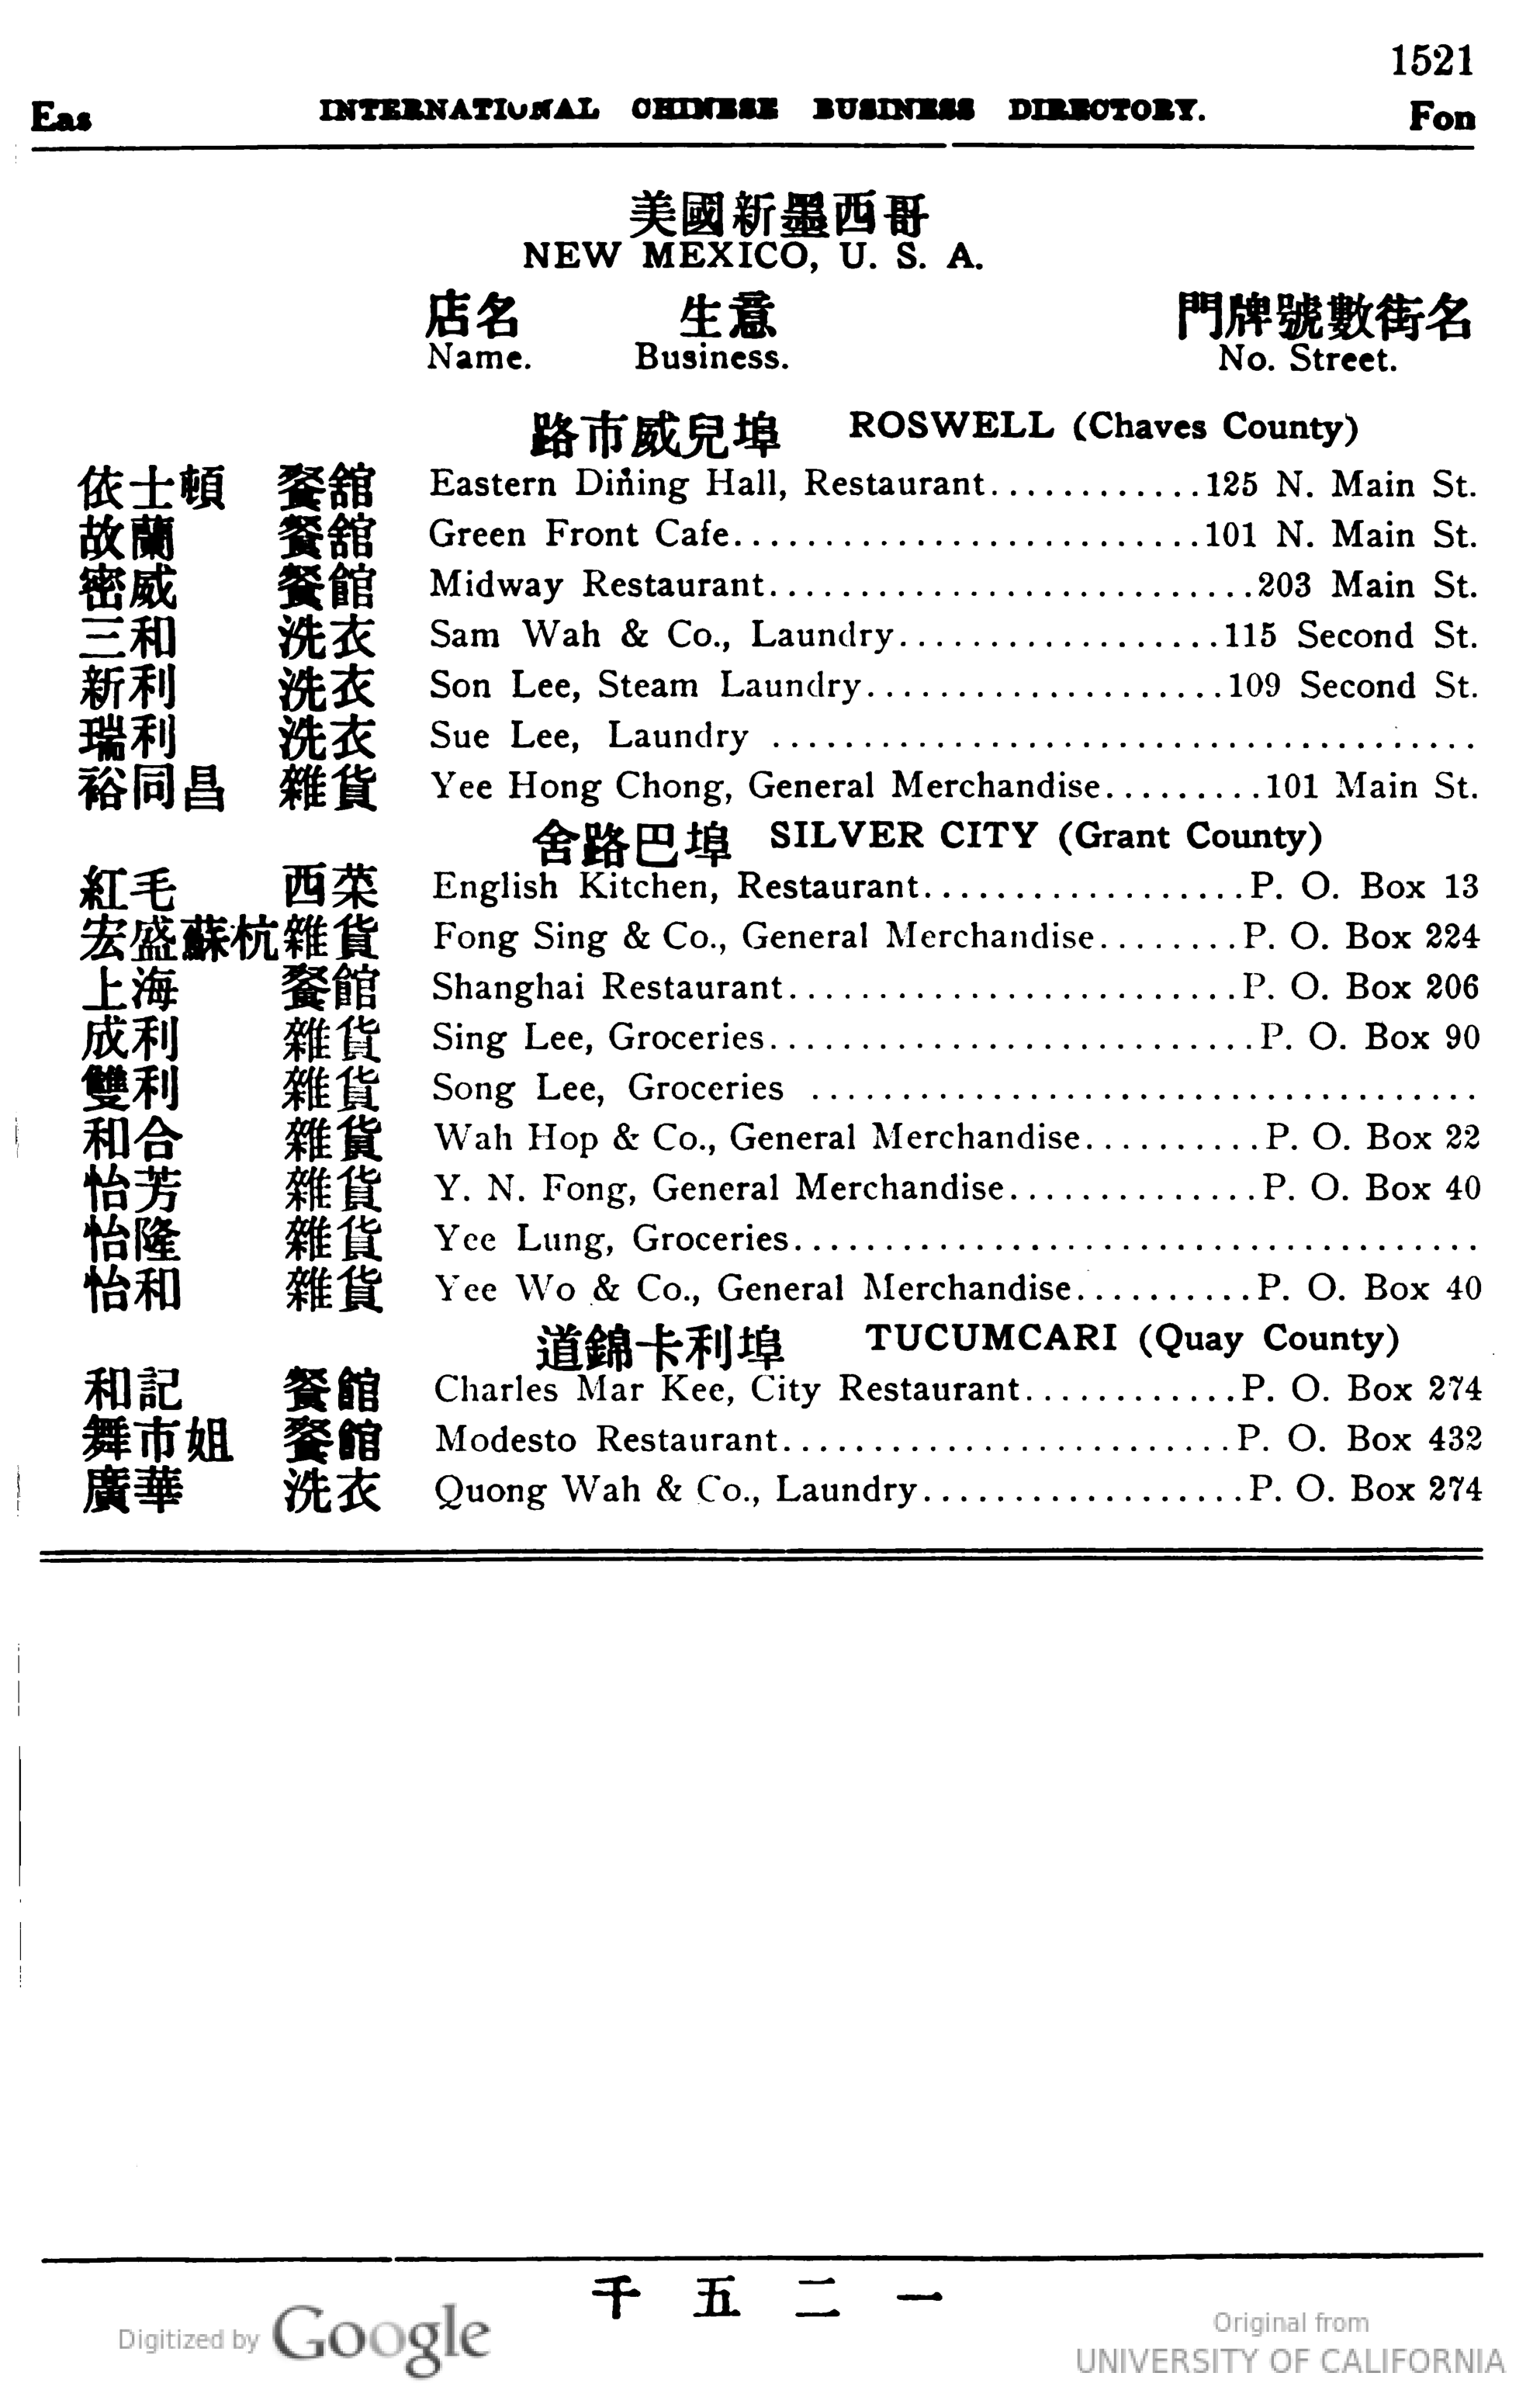 Immigrant Chinese businesses in New Mexico, 1913, Page 2